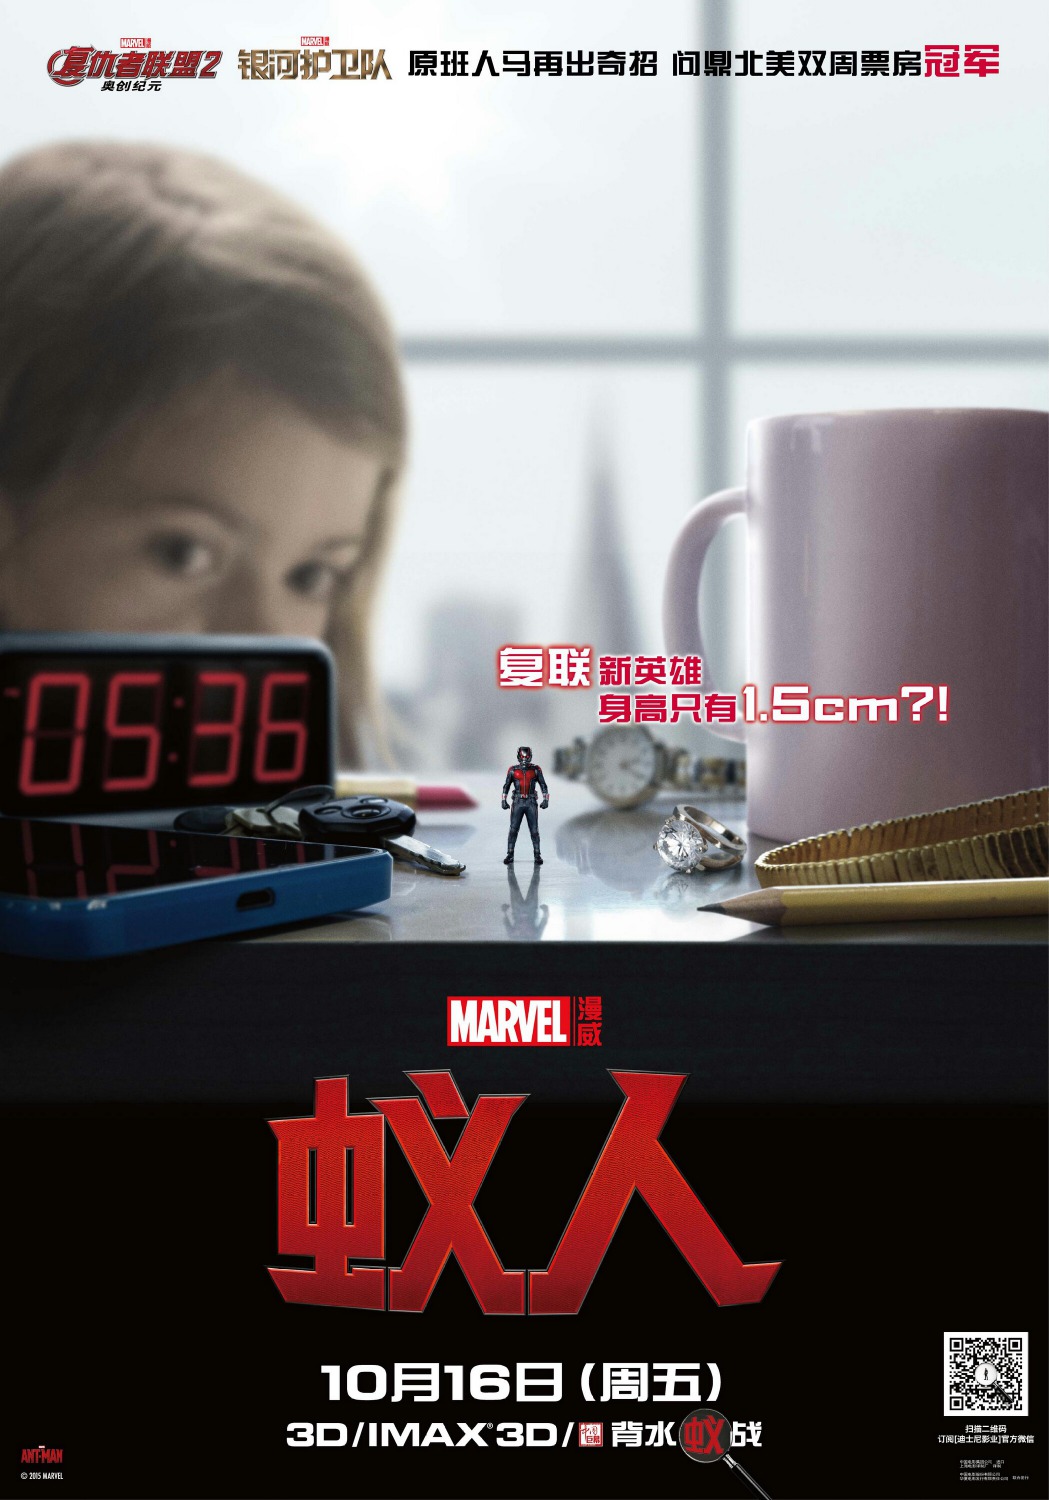 Extra Large Movie Poster Image for Ant-Man (#18 of 22)